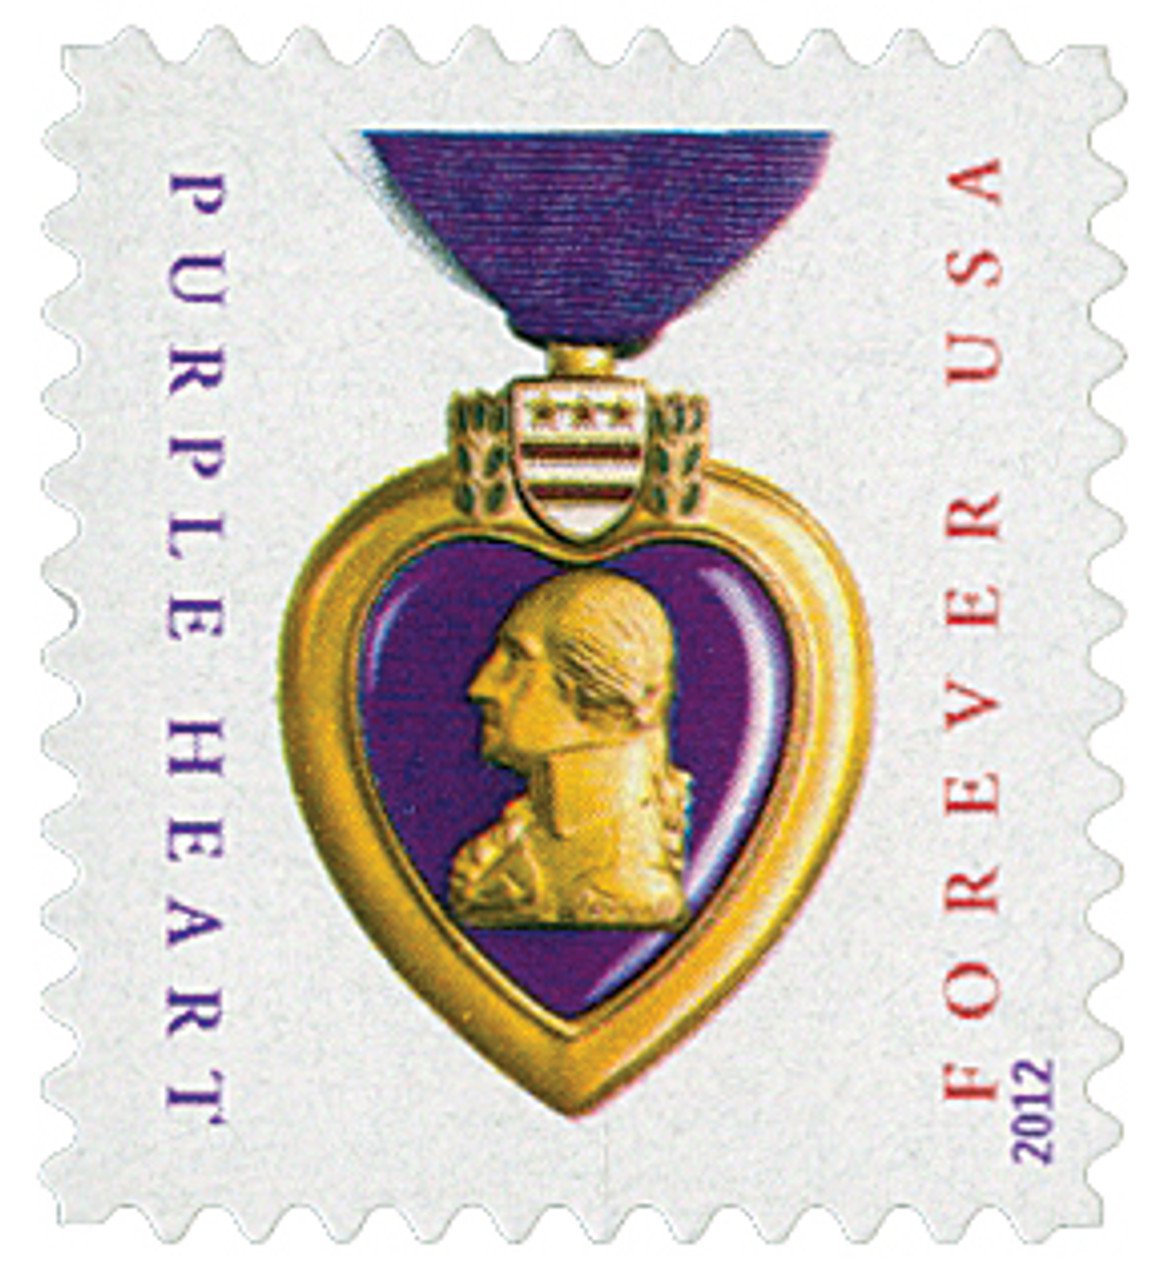 4704 - 2012 First-Class Forever Stamp - Purple Heart - Mystic